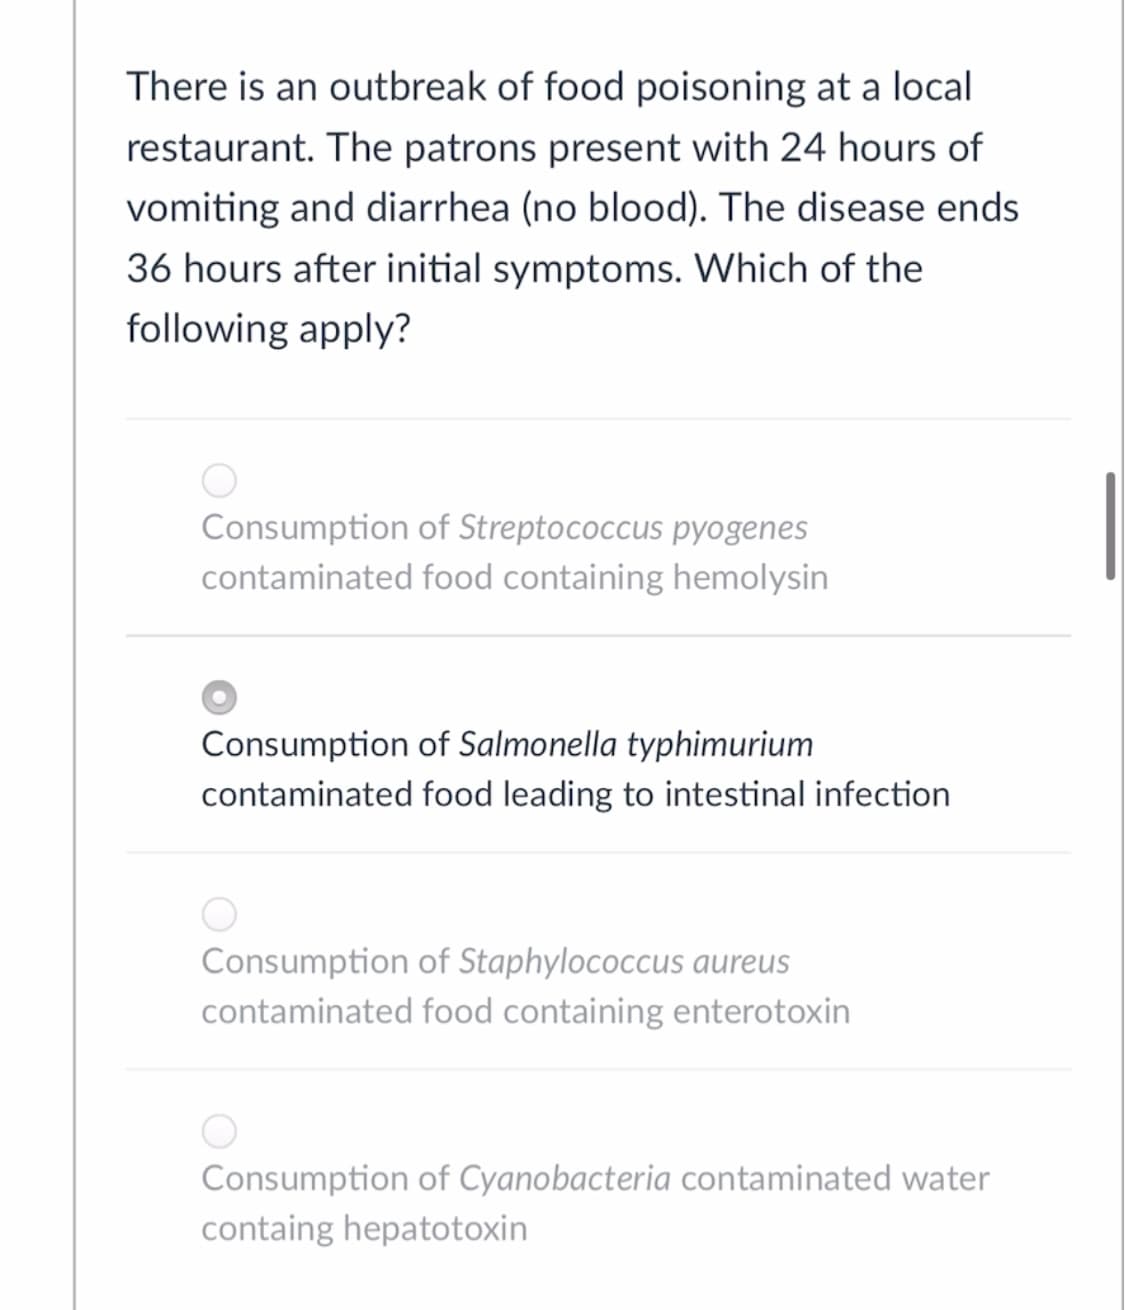 There is an outbreak of food poisoning at a local
restaurant. The patrons present with 24 hours of
vomiting and diarrhea (no blood). The disease ends
36 hours after initial symptoms. Which of the
following apply?
Consumption of Streptococcus pyogenes
contaminated food containing hemolysin
Consumption of Salmonella typhimurium
contaminated food leading to intestinal infection
Consumption of Staphylococcus aureus
contaminated food containing enterotoxin
Consumption of Cyanobacteria contaminated water
containg hepatotoxin
